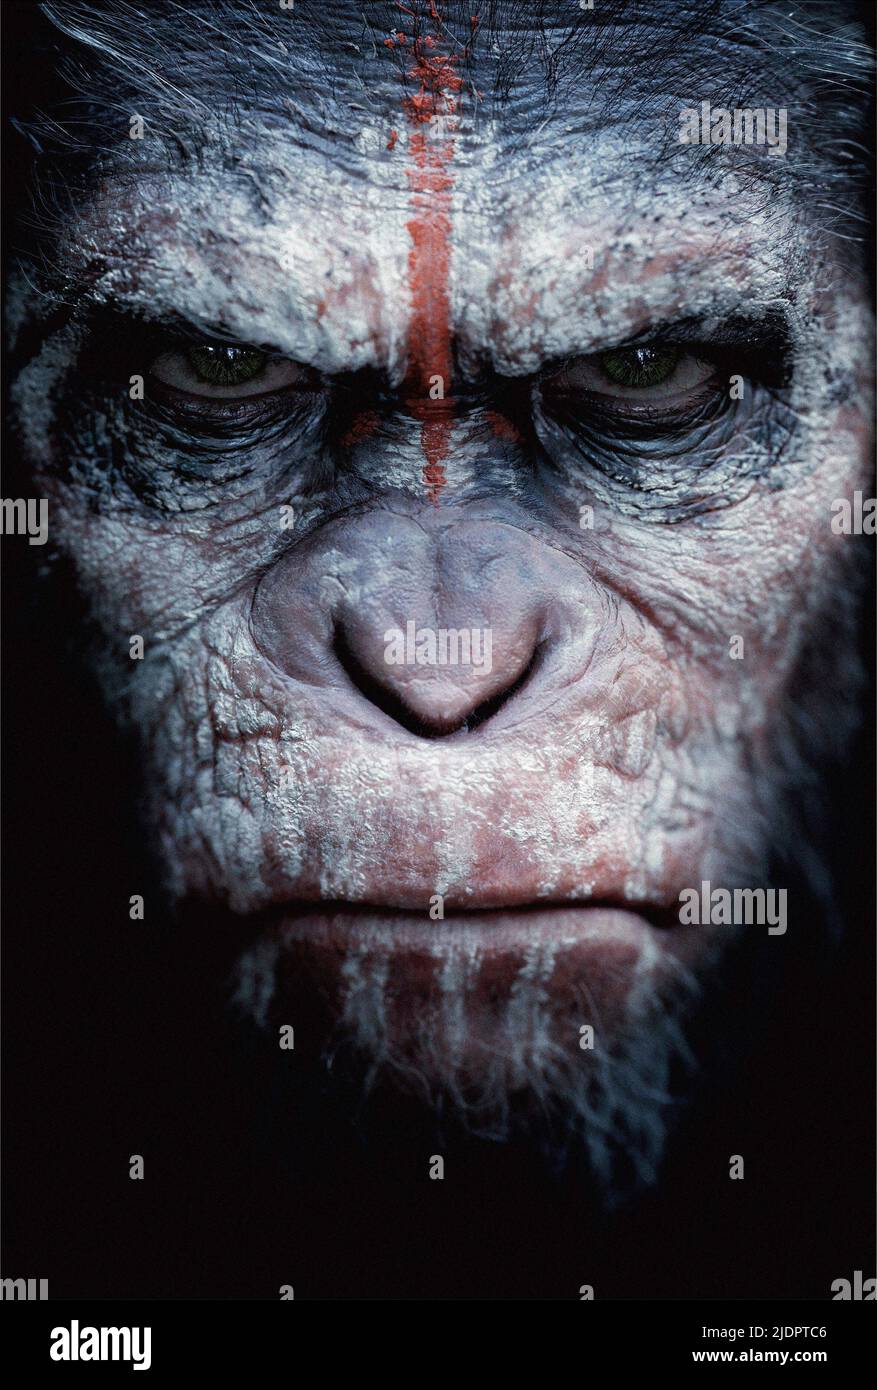 MOVIE POSTER, DAWN OF THE PLANET OF THE APES, 2014, Stock Photo